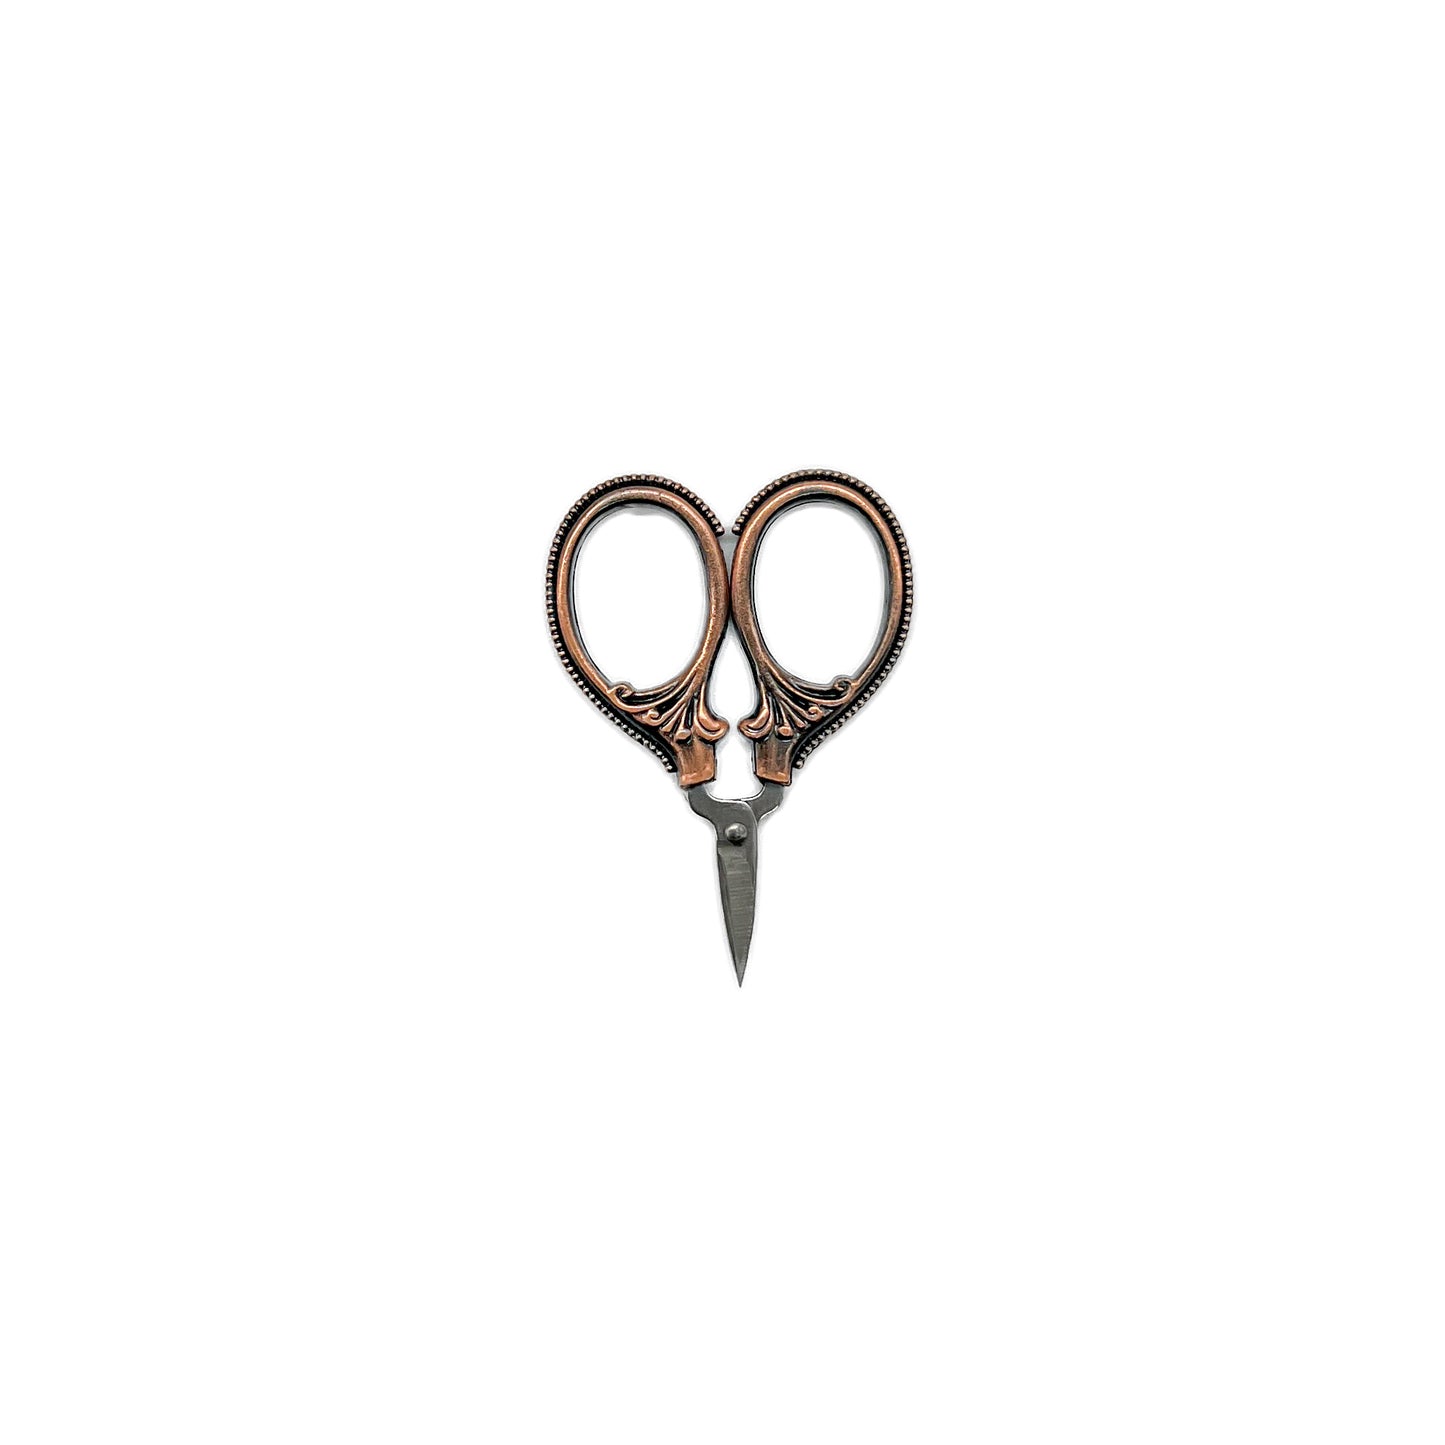 A pair of 2.25 inch Antique Brass Crafting Scissors on a white background.